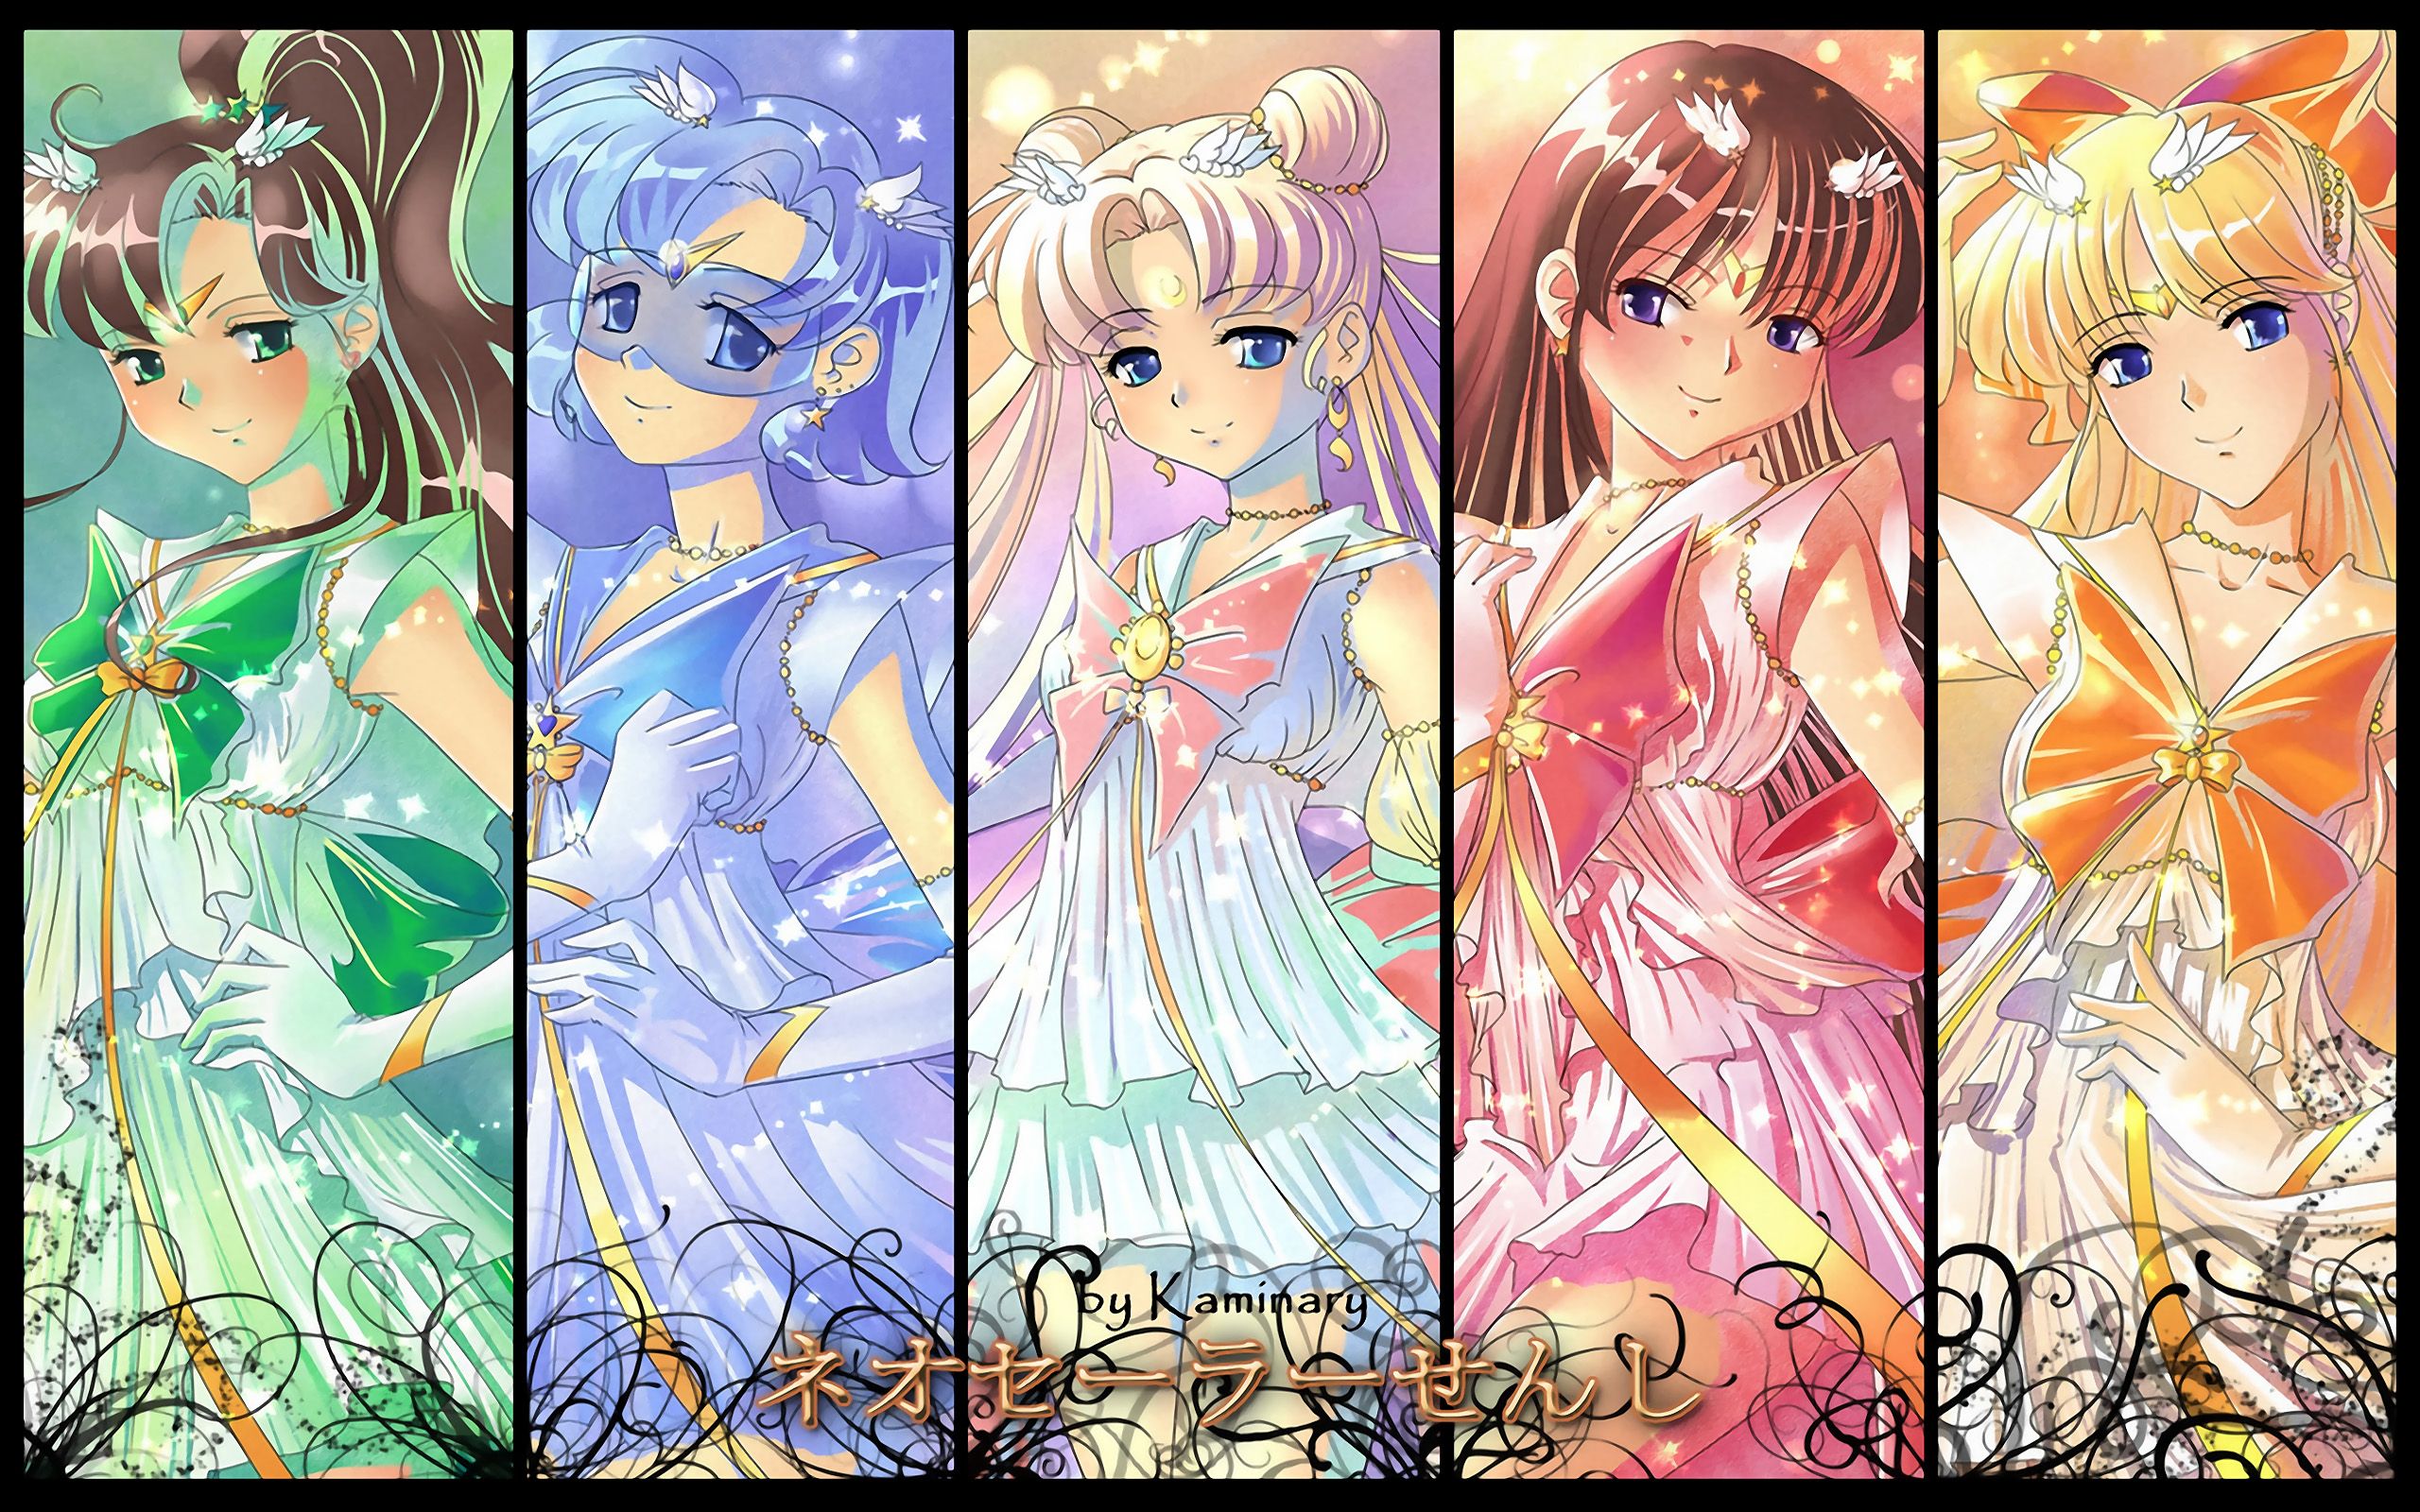 All the Pretty Guardians in their transformation dresses - Sailor Venus